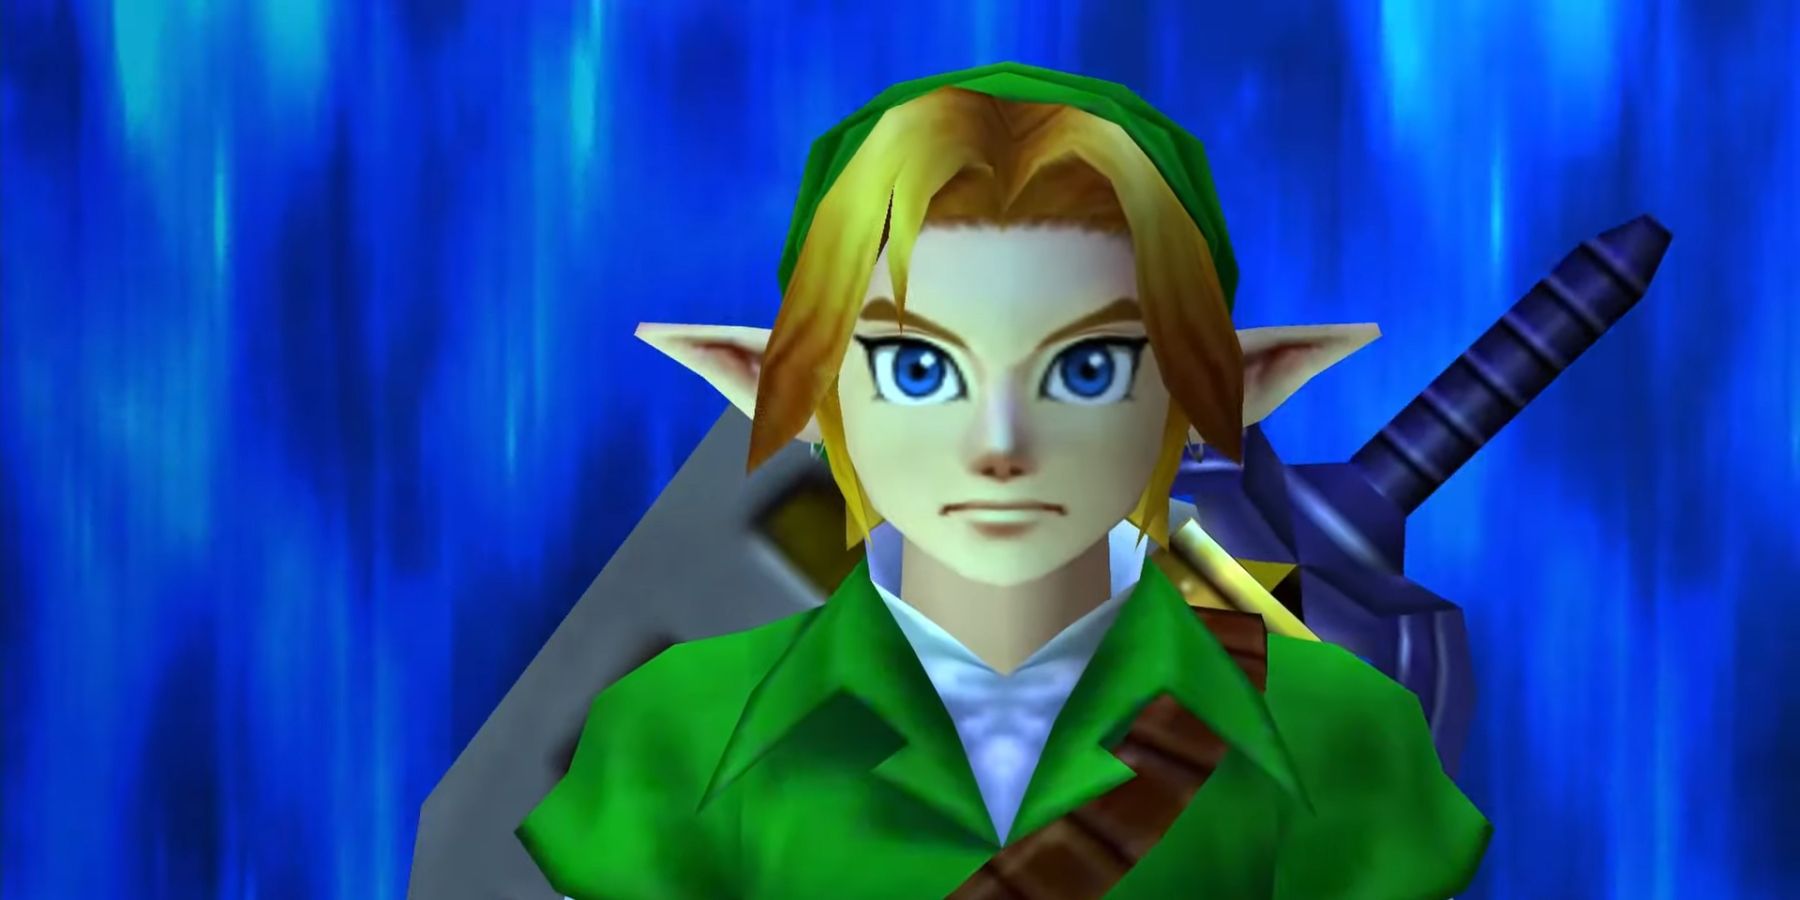 The legend of zelda ocarina of time, high quality, link wearing